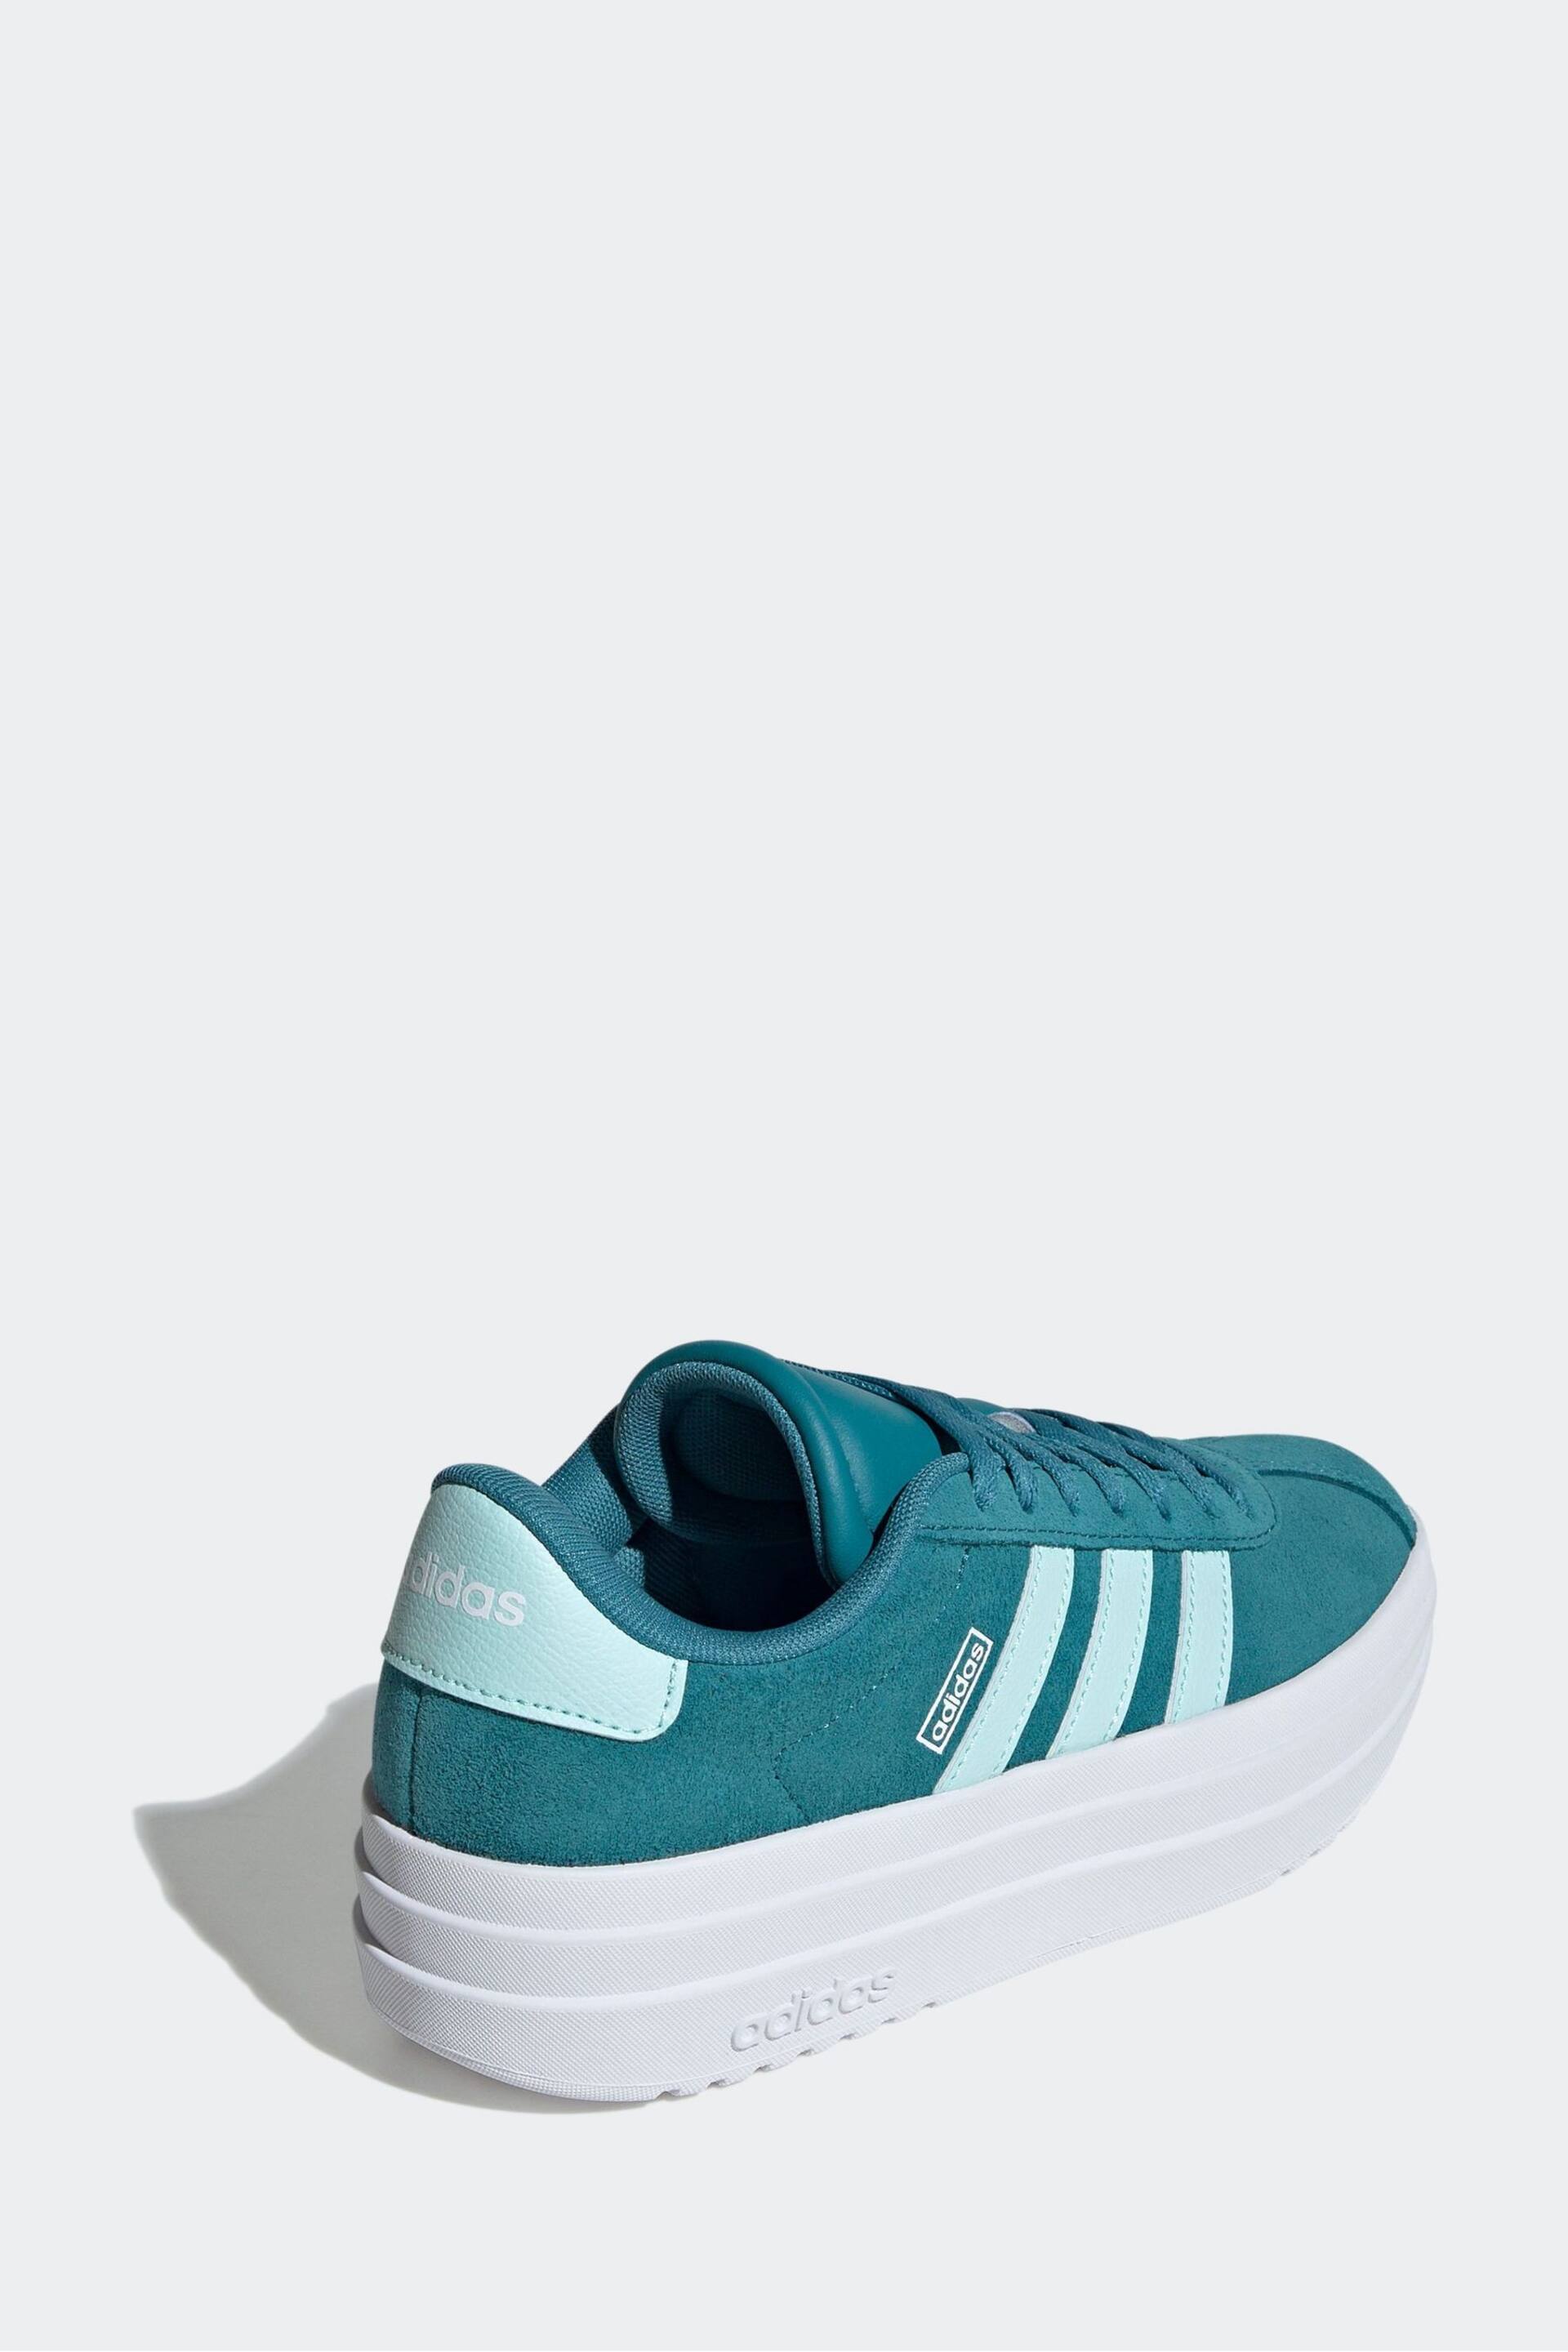 adidas Blue/White Kids VL Court Bold Trainers - Image 4 of 13